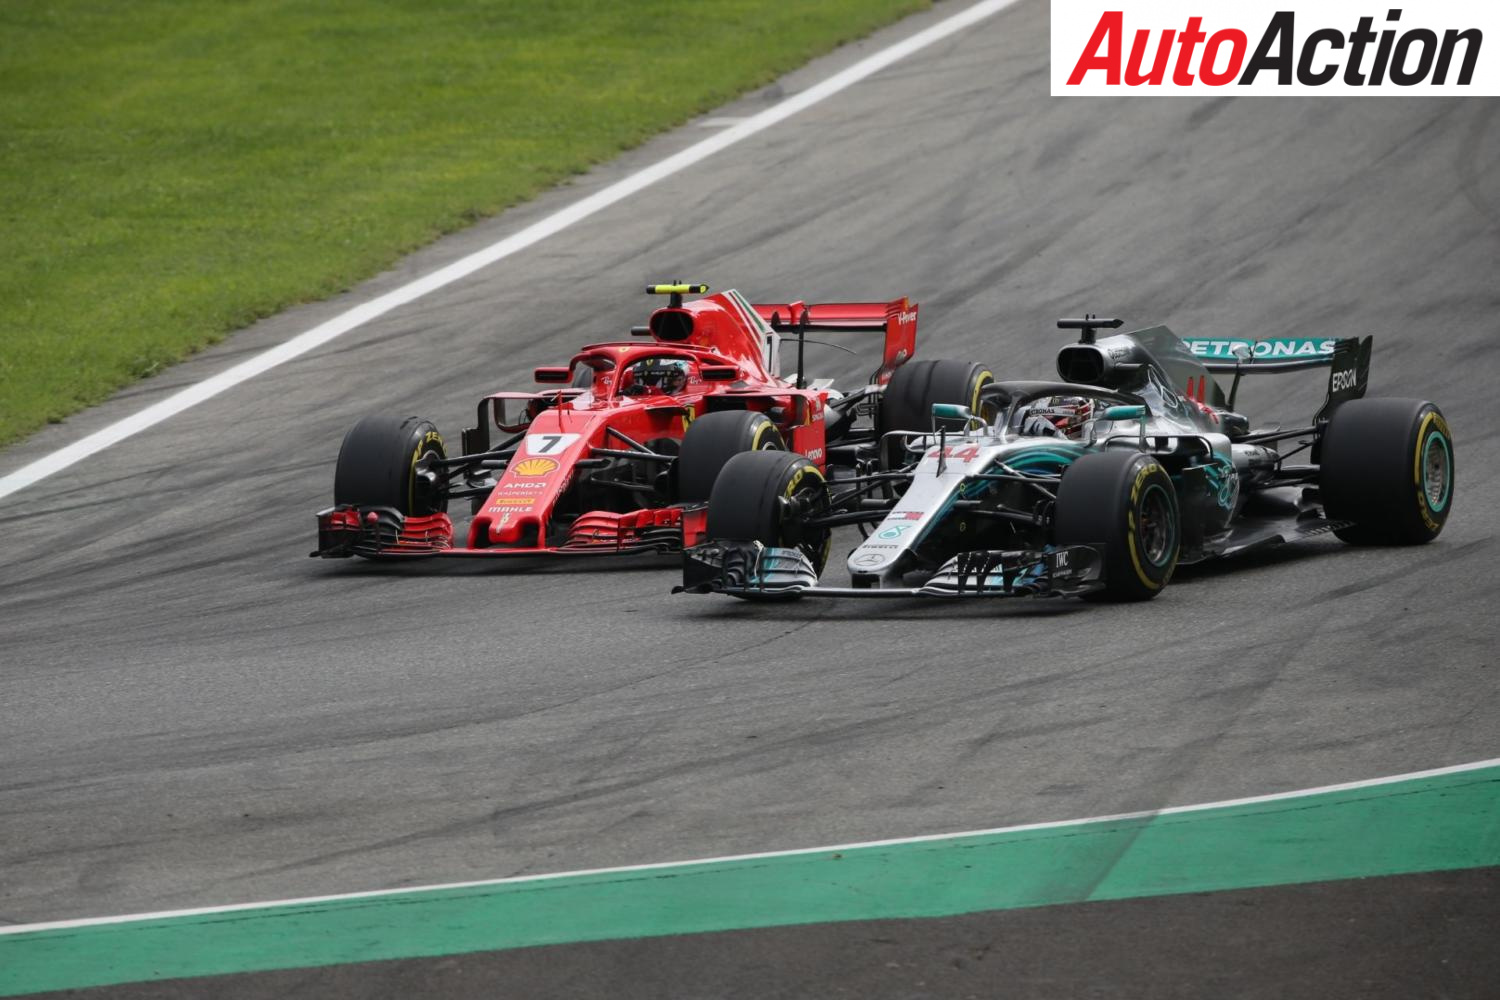 Lewis Hamilton battling with Kimi Raikkonen for the lead of the Italian Grand Prix - Photo: Suttons Images